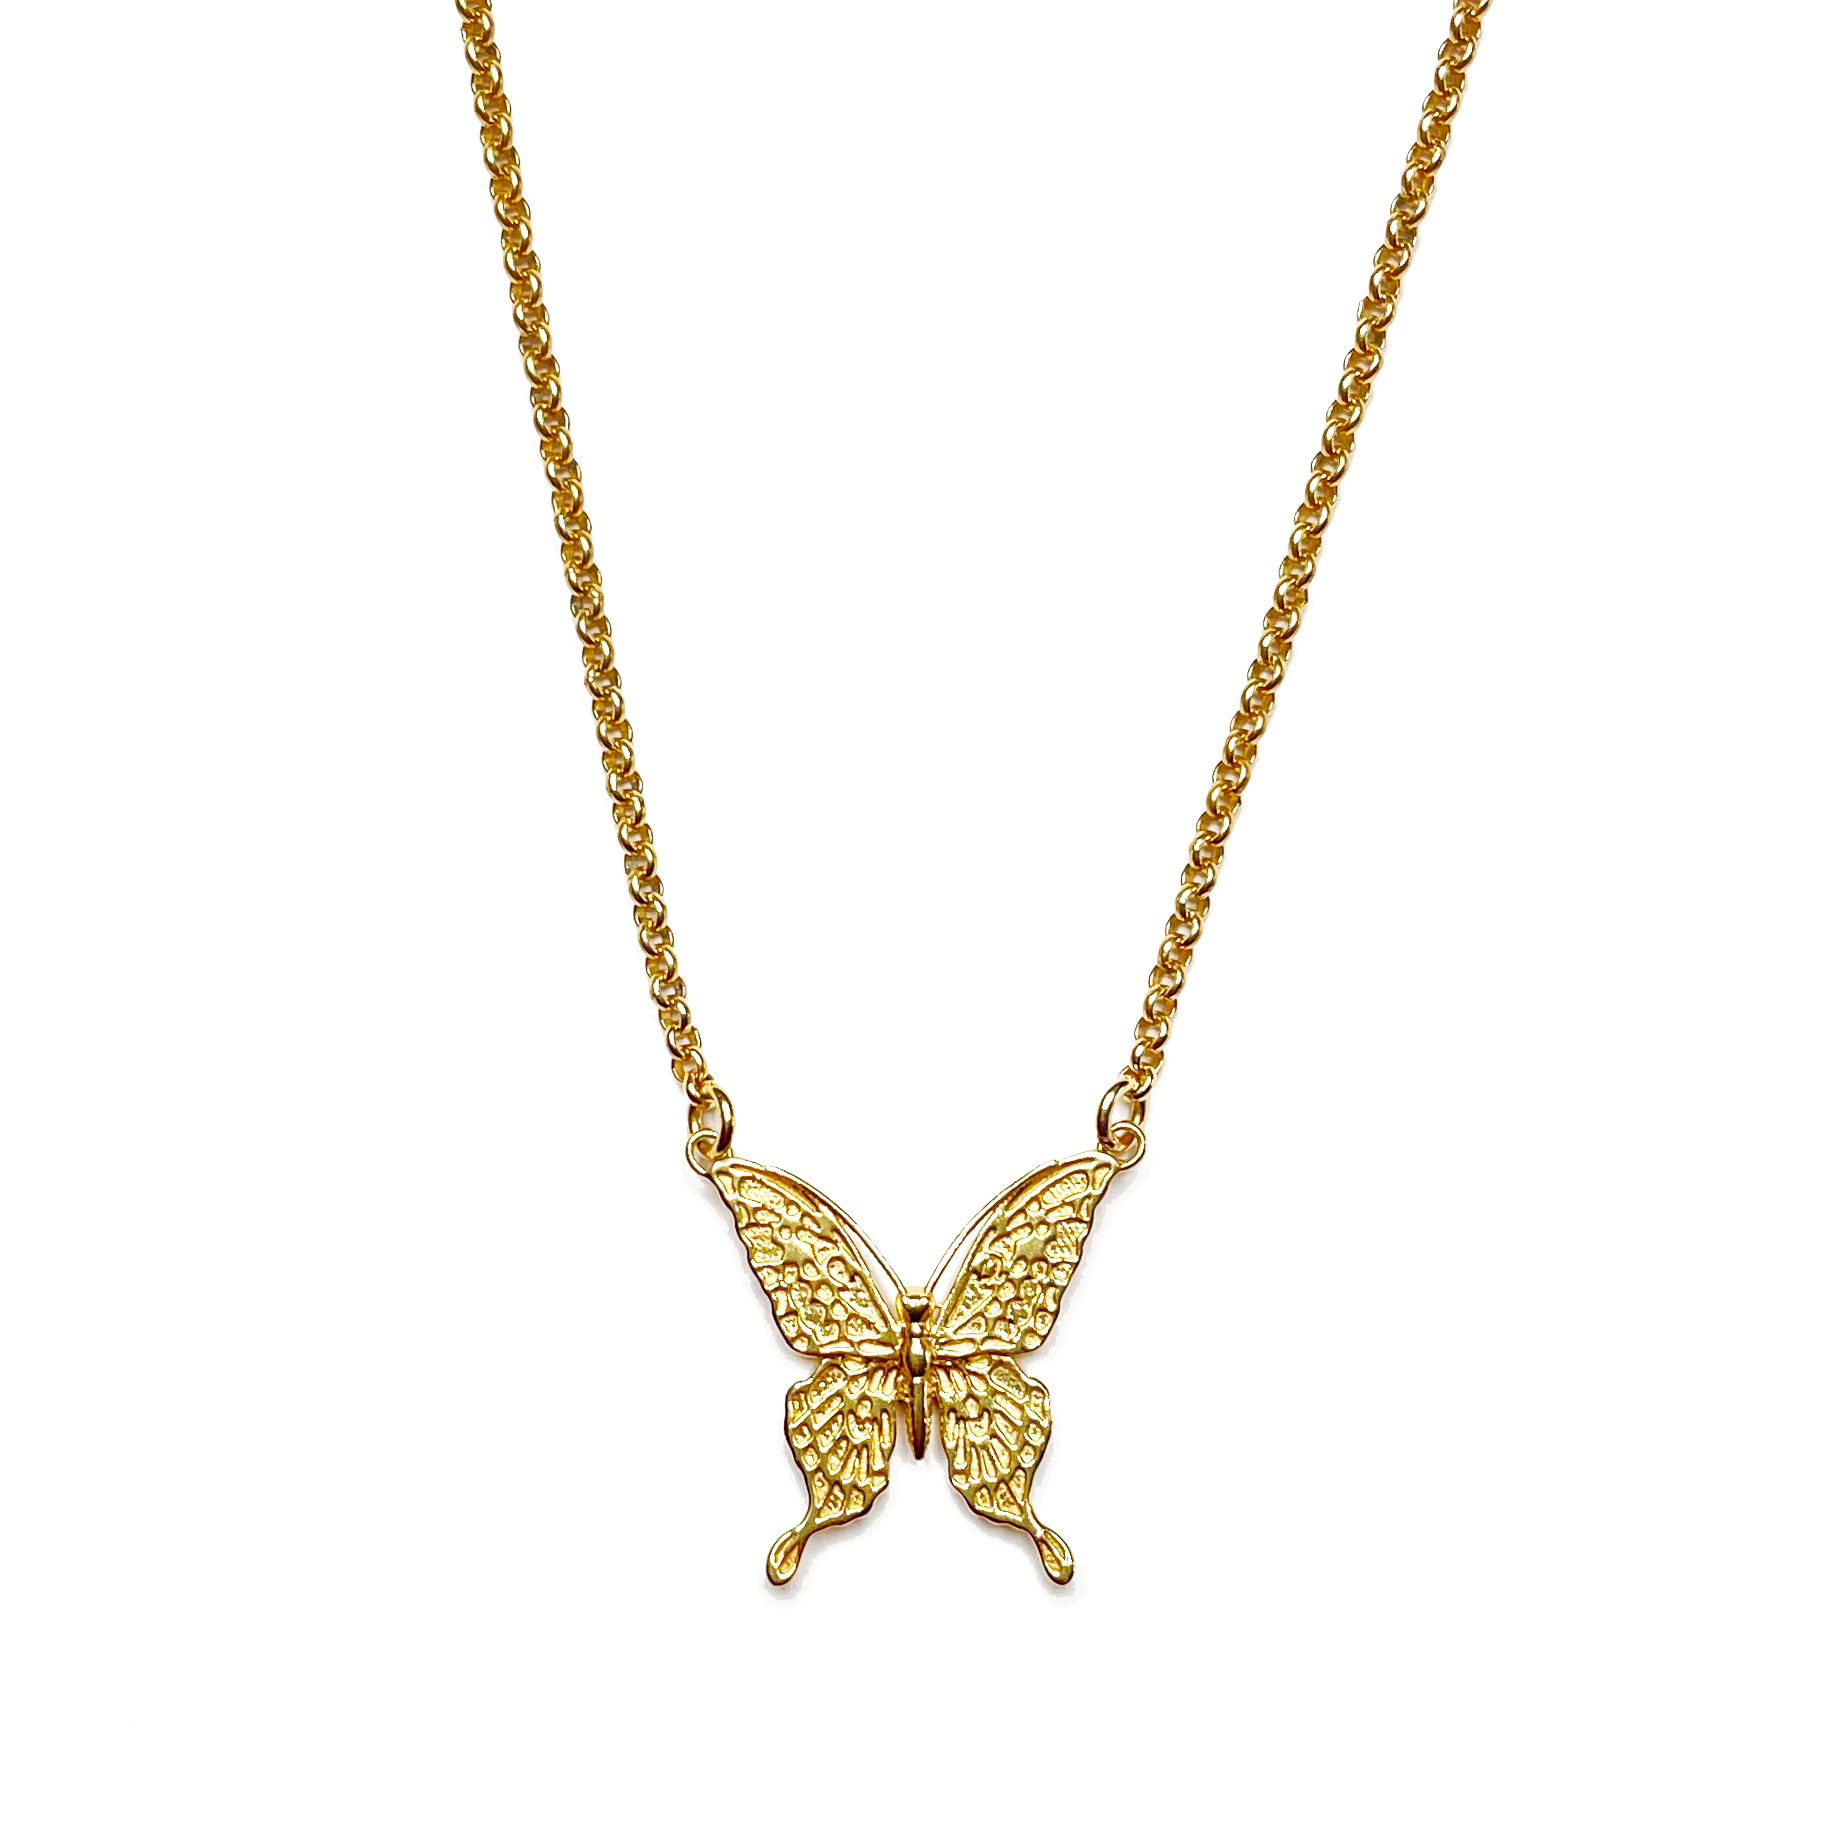 Butterfly Necklace - Small